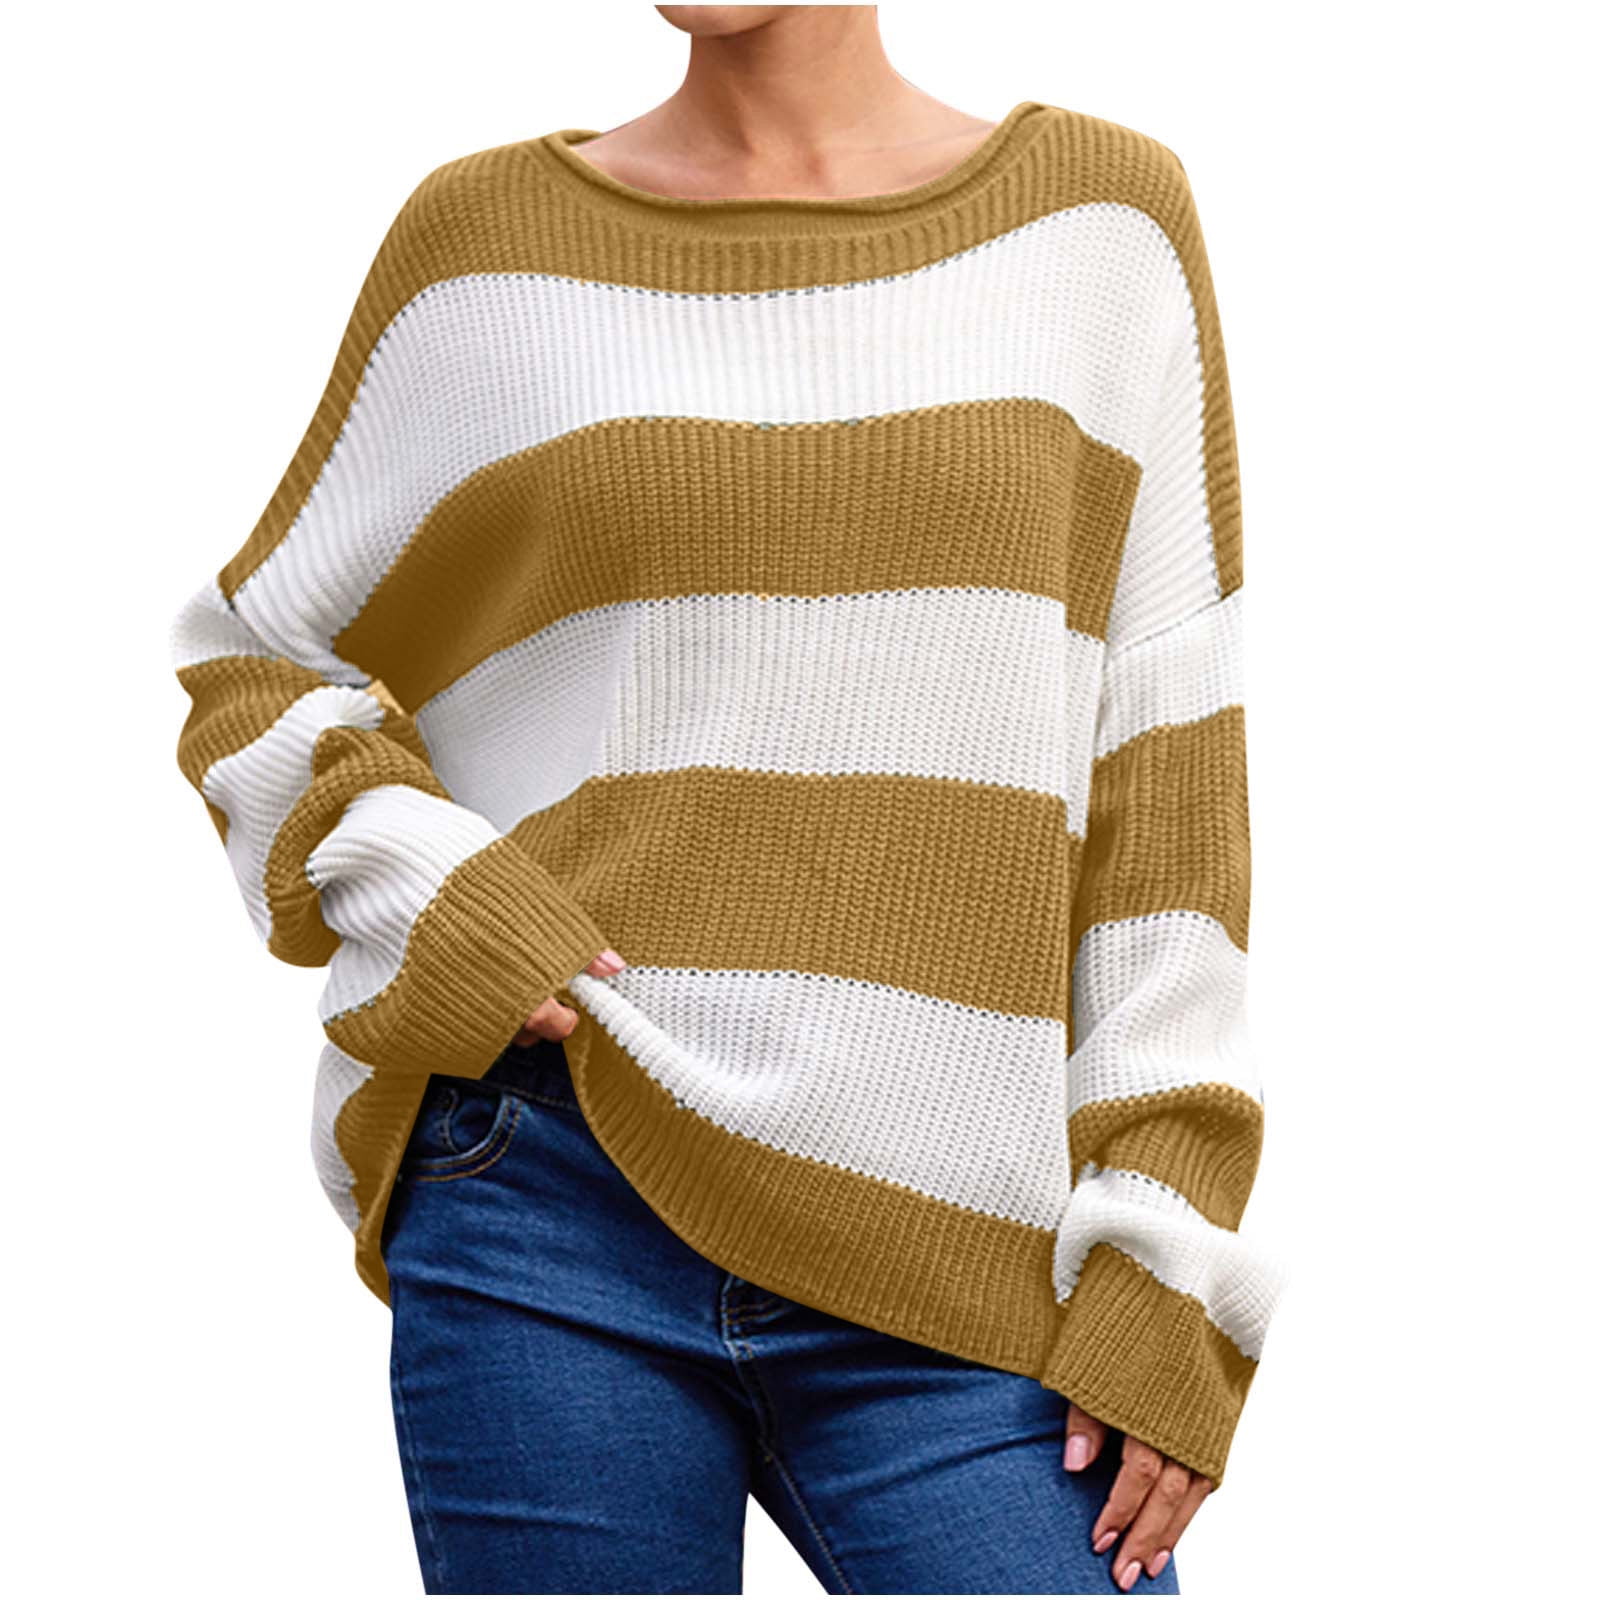 Cardigan Sweaters for Women Graphic Sweater Women Lightweight Sweater Strip  Off Shoulder Knit Tops Casual Loose Blouse Shirt Sweaters for Women